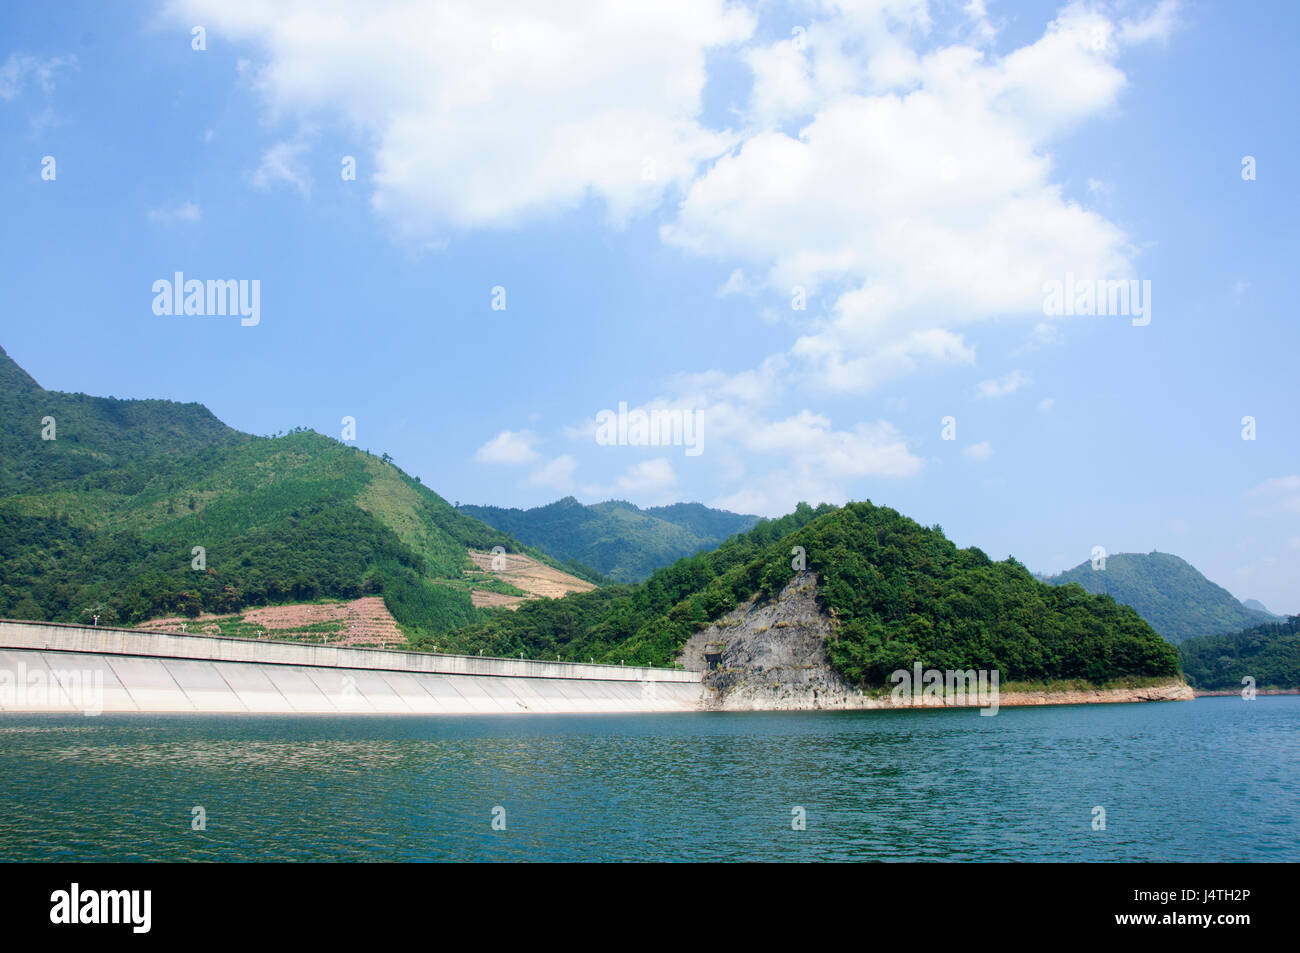 The reservoir scenery with blue sky in summer Stock Photo